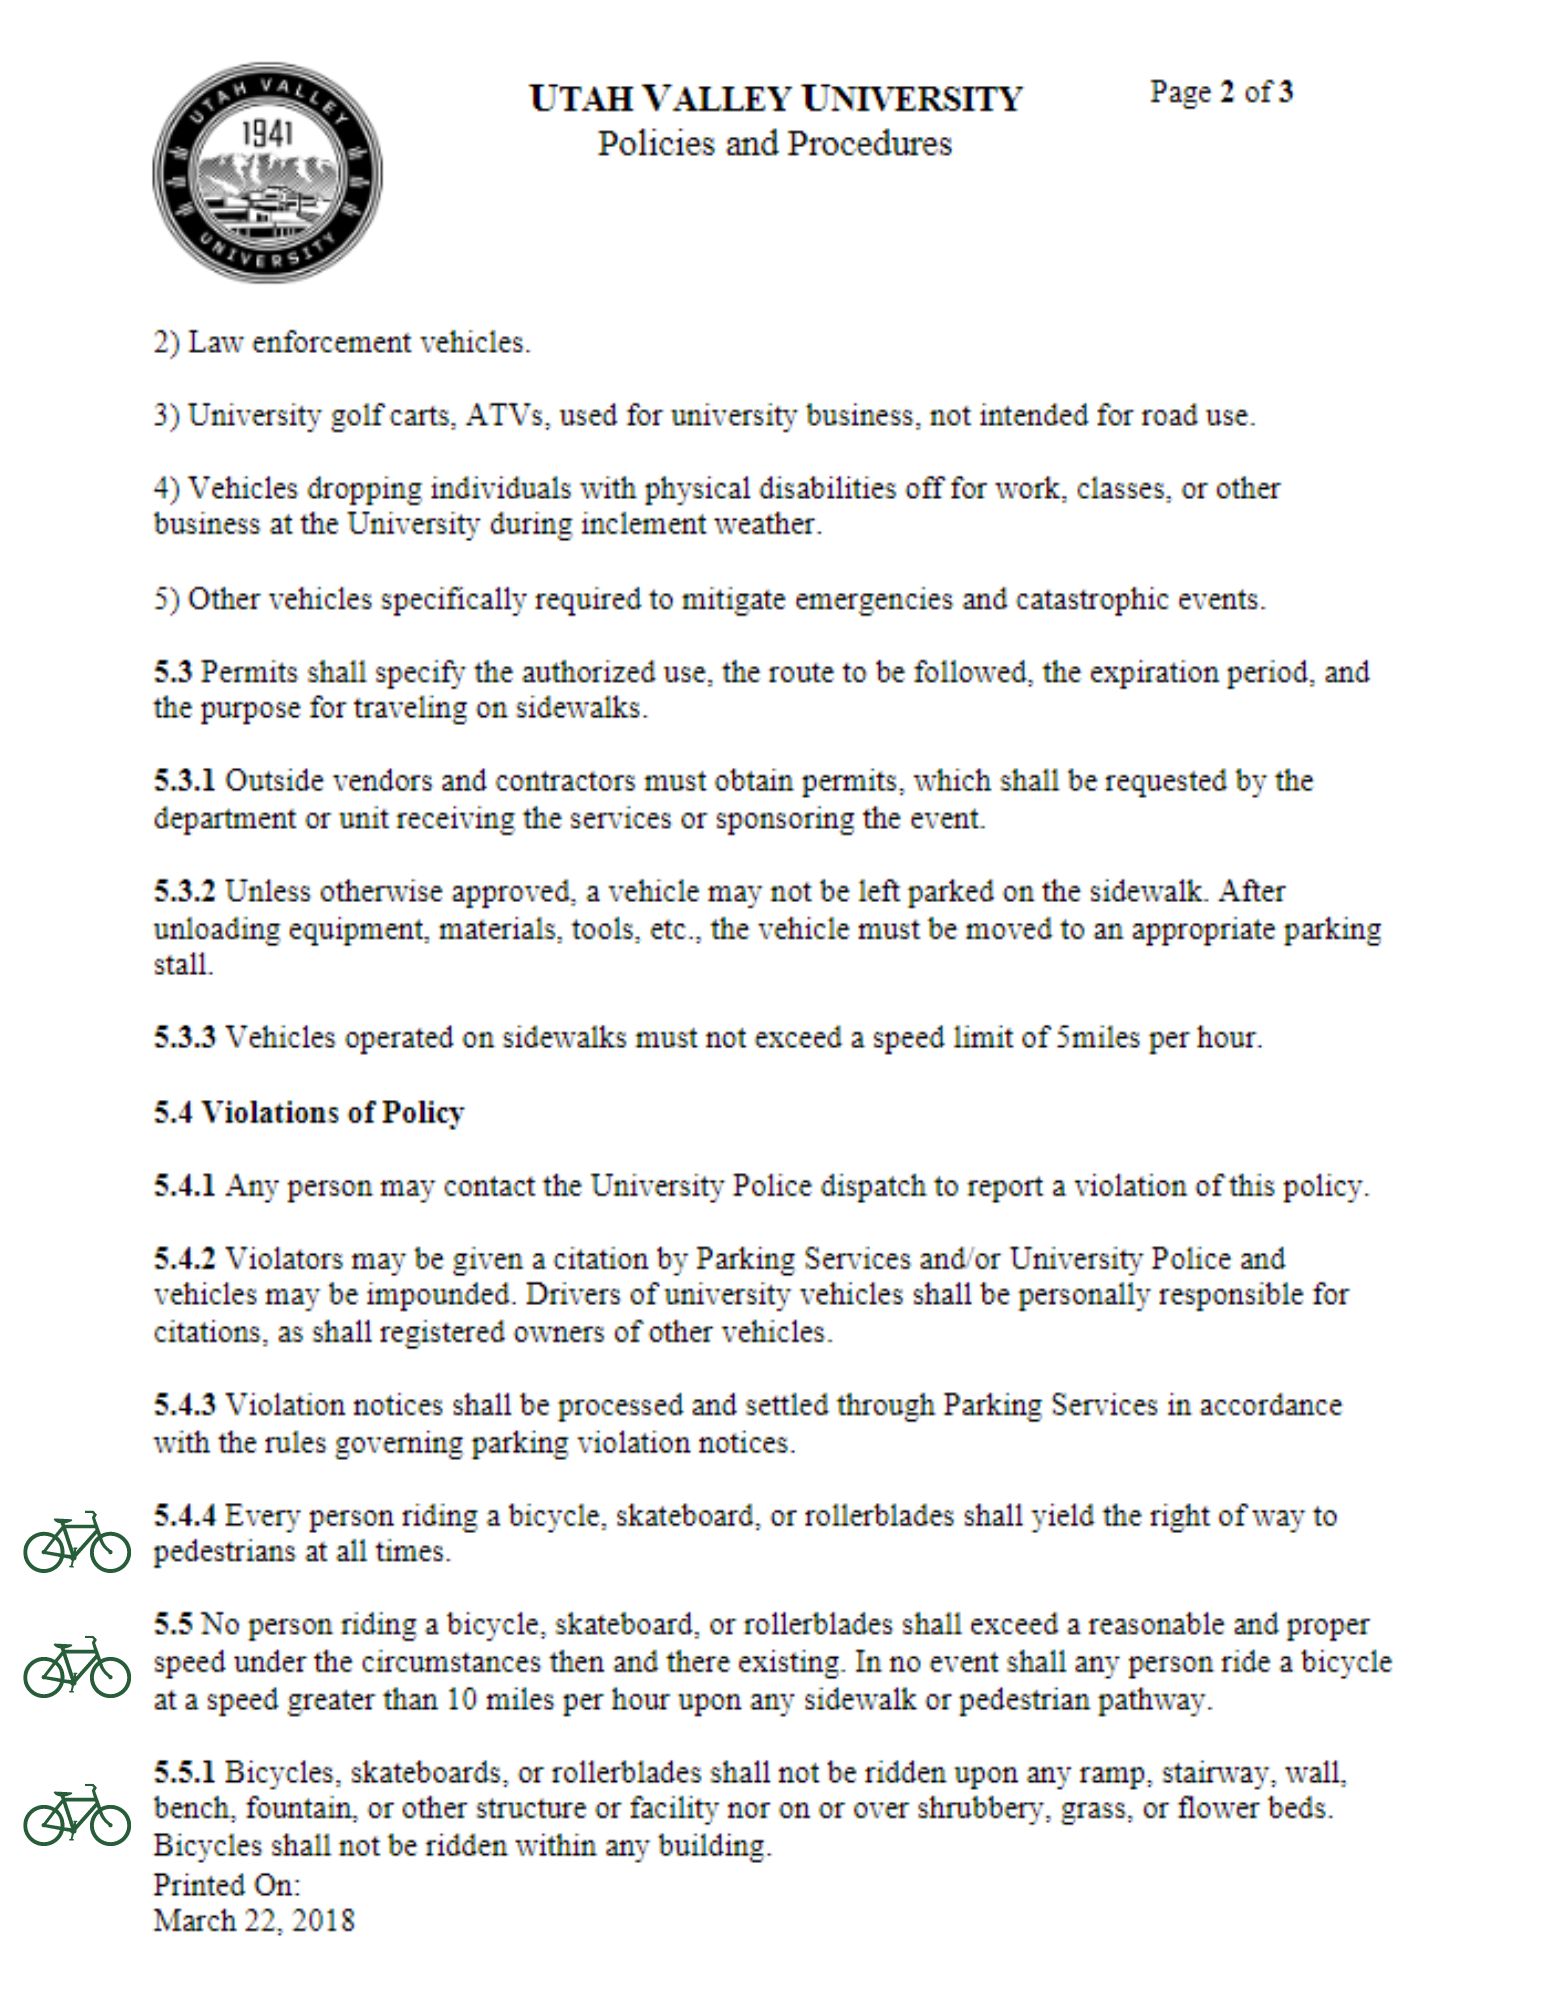 UVU Campus Walkway Safety Policy page two